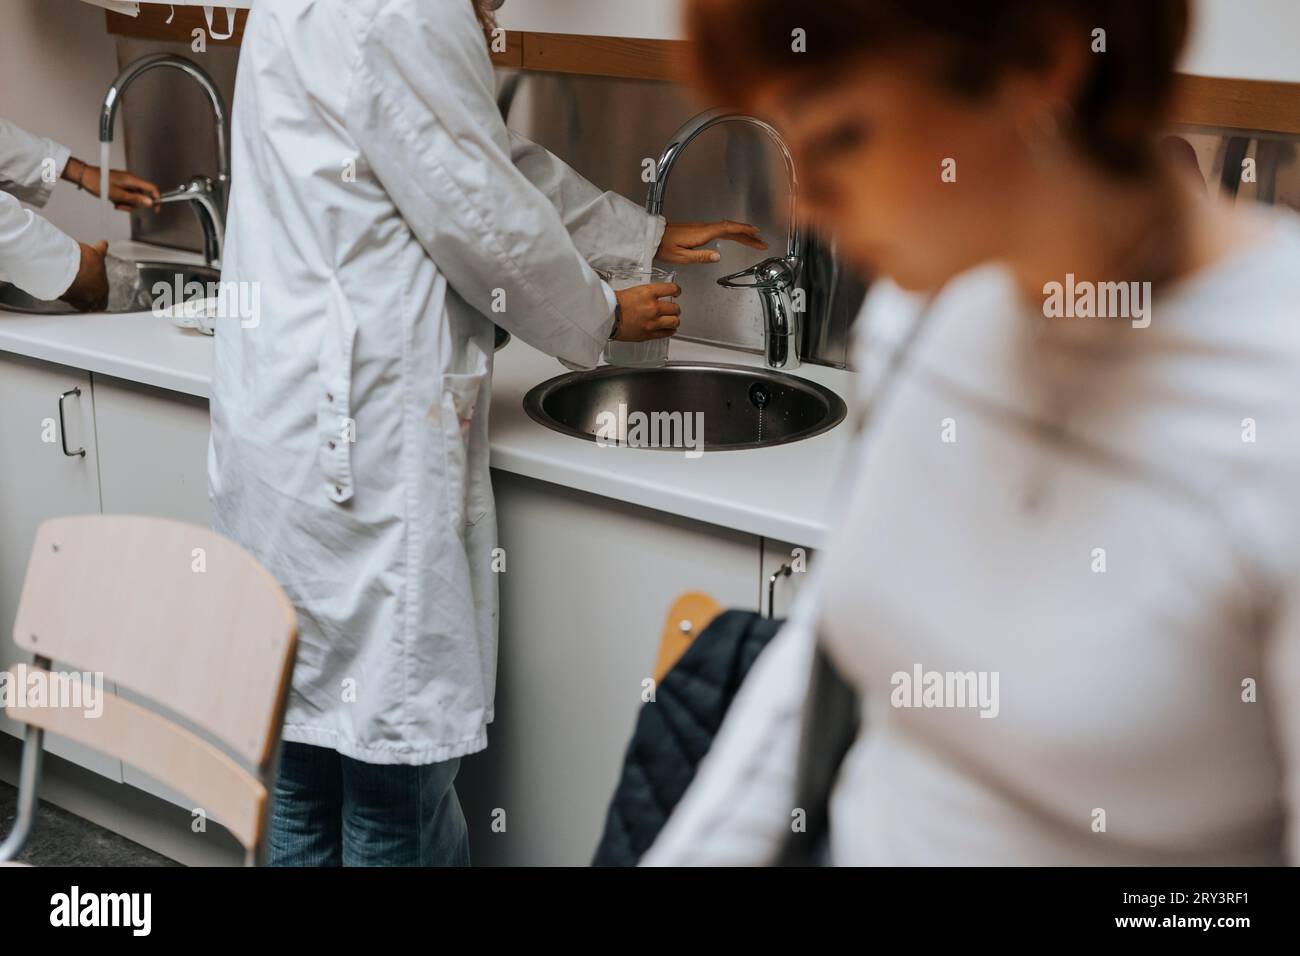 Midsection of female young student washing beaker in sink at science lab Stock Photo